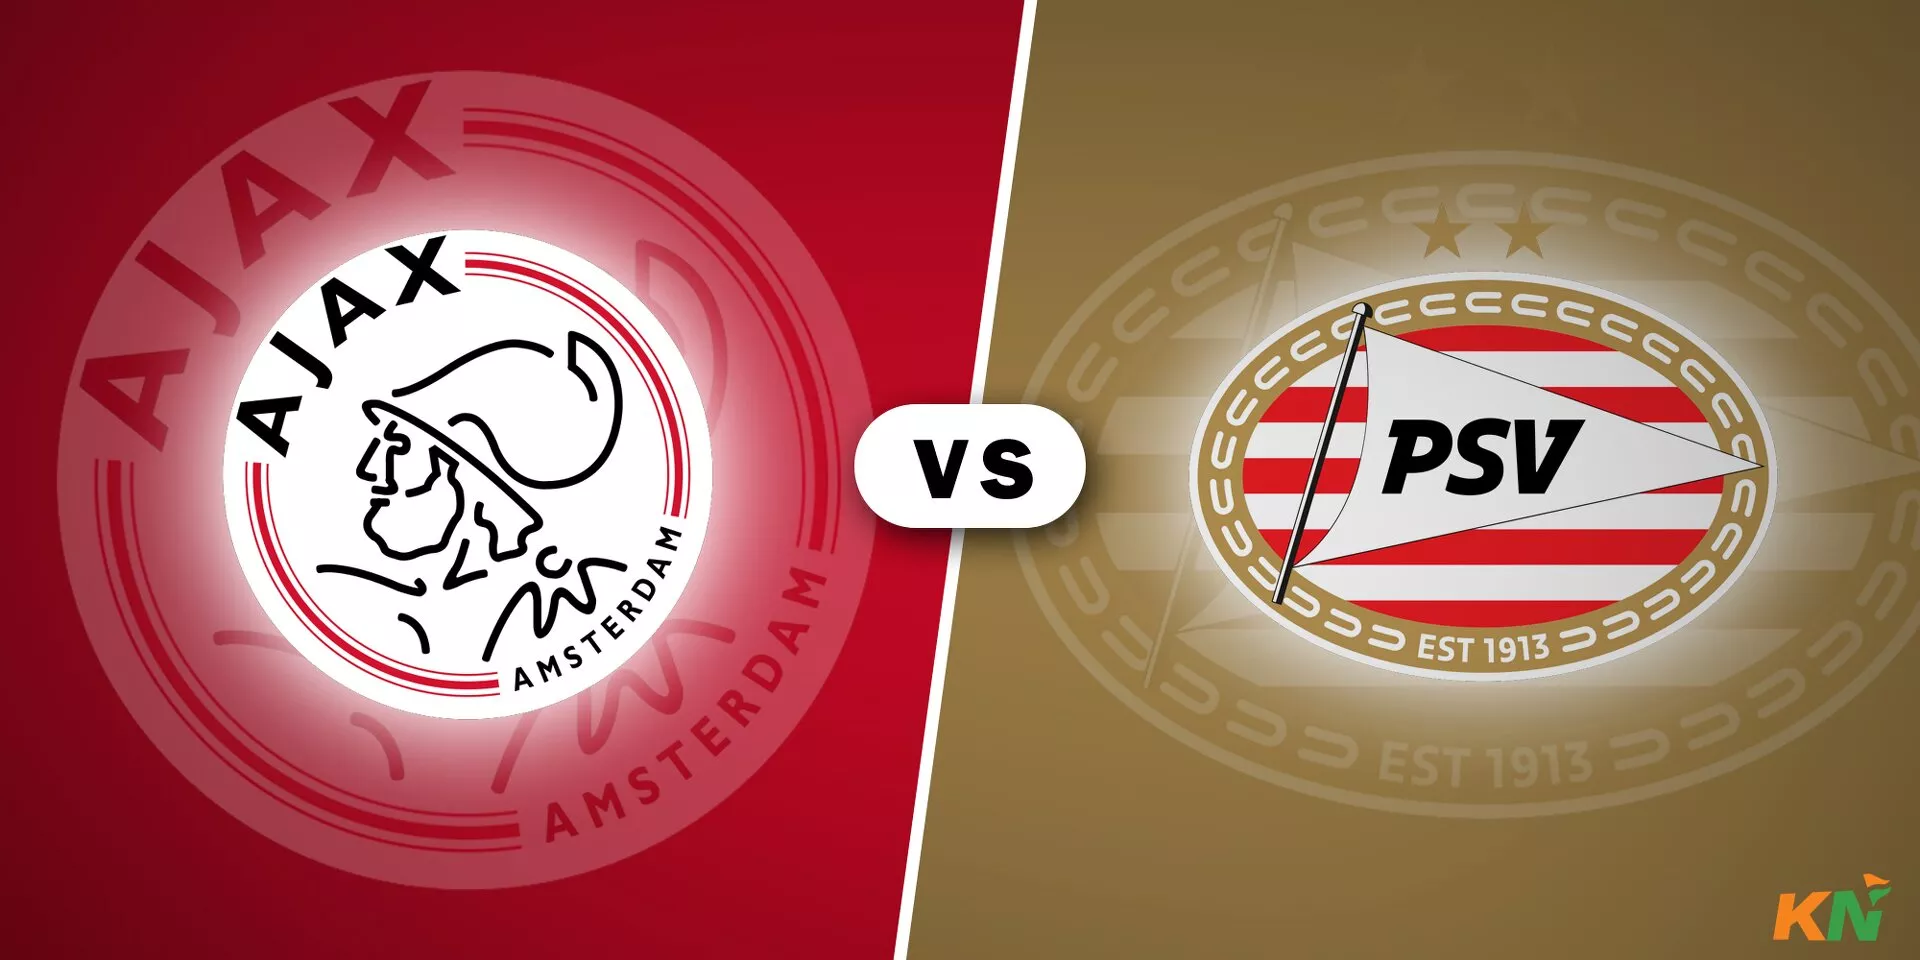 OptaJohan on X: 1 – With both PSV and Ajax reaching the final again, the  KNVB Cup will have the same two teams in the final in consecutive years for  the first